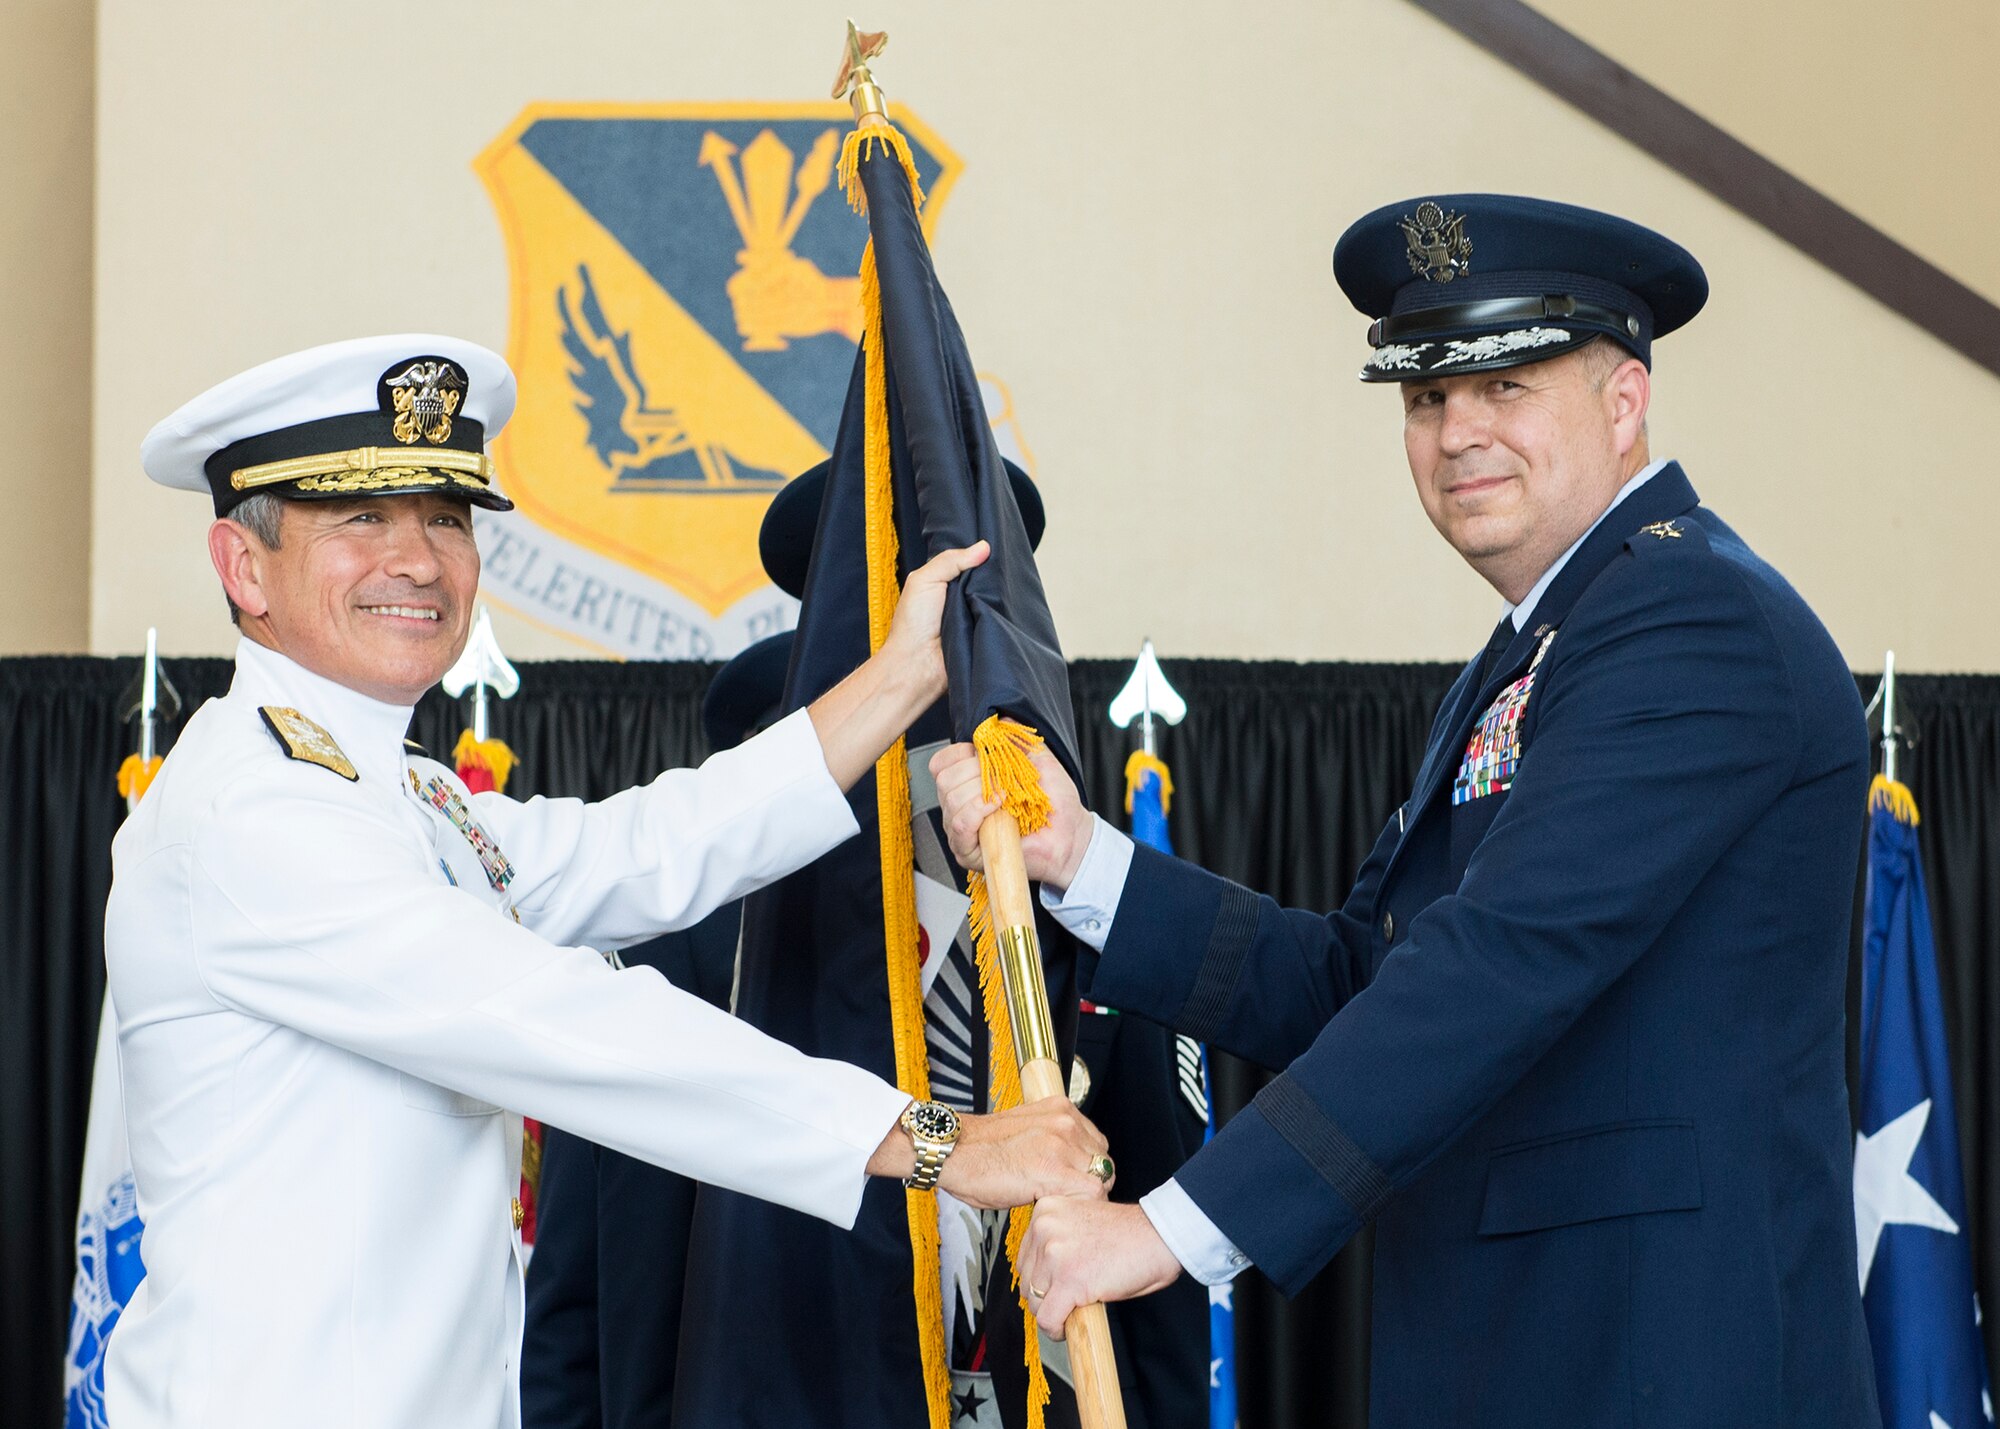 U.S. Air Force Lt. Gen. Jerry P. Martinez, incoming United States Forces, Japan and 5th Air Force commander, accepts the guidon from Adm. Harry B. Harris Jr., U.S. Pacific Command commander, during the Assumption of Command ceremony October 6, 2016, at Yokota Air Base, Japan. Harris and Gen. Terrence J. O’Shaughnessy, Pacific Air Forces commander, presided over the ceremony. (U.S. Air Force photo by Airman 1st Class Donald Hudson/Released)